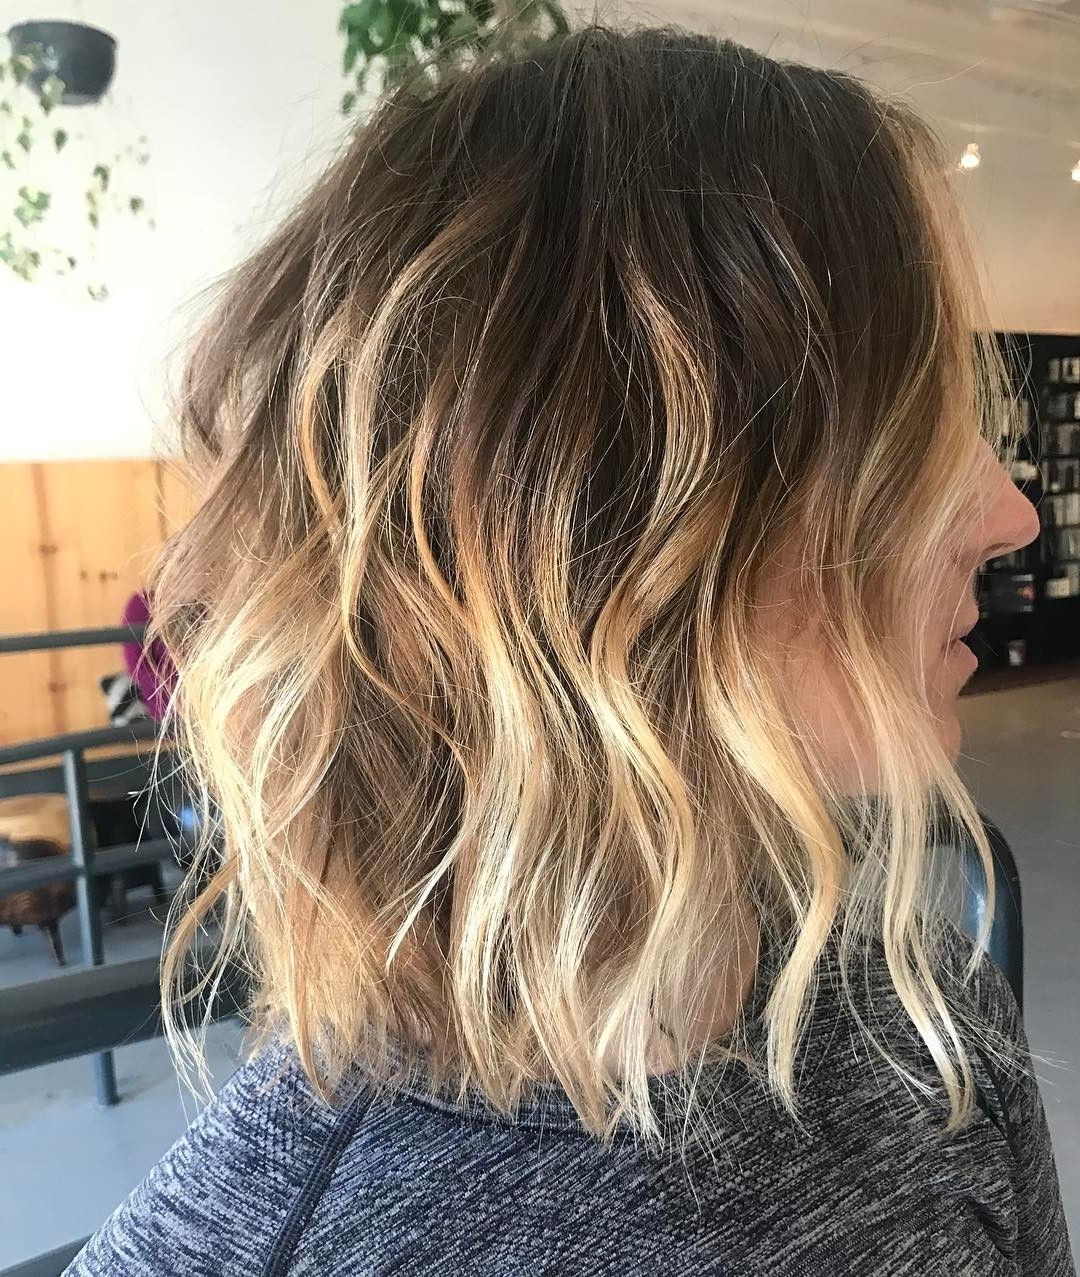 Most Popular Tousled Shoulder Length Ombre Blonde Hairstyles Throughout 30 Chic Everyday Hairstyles For Shoulder Length Hair: Medium (View 3 of 20)